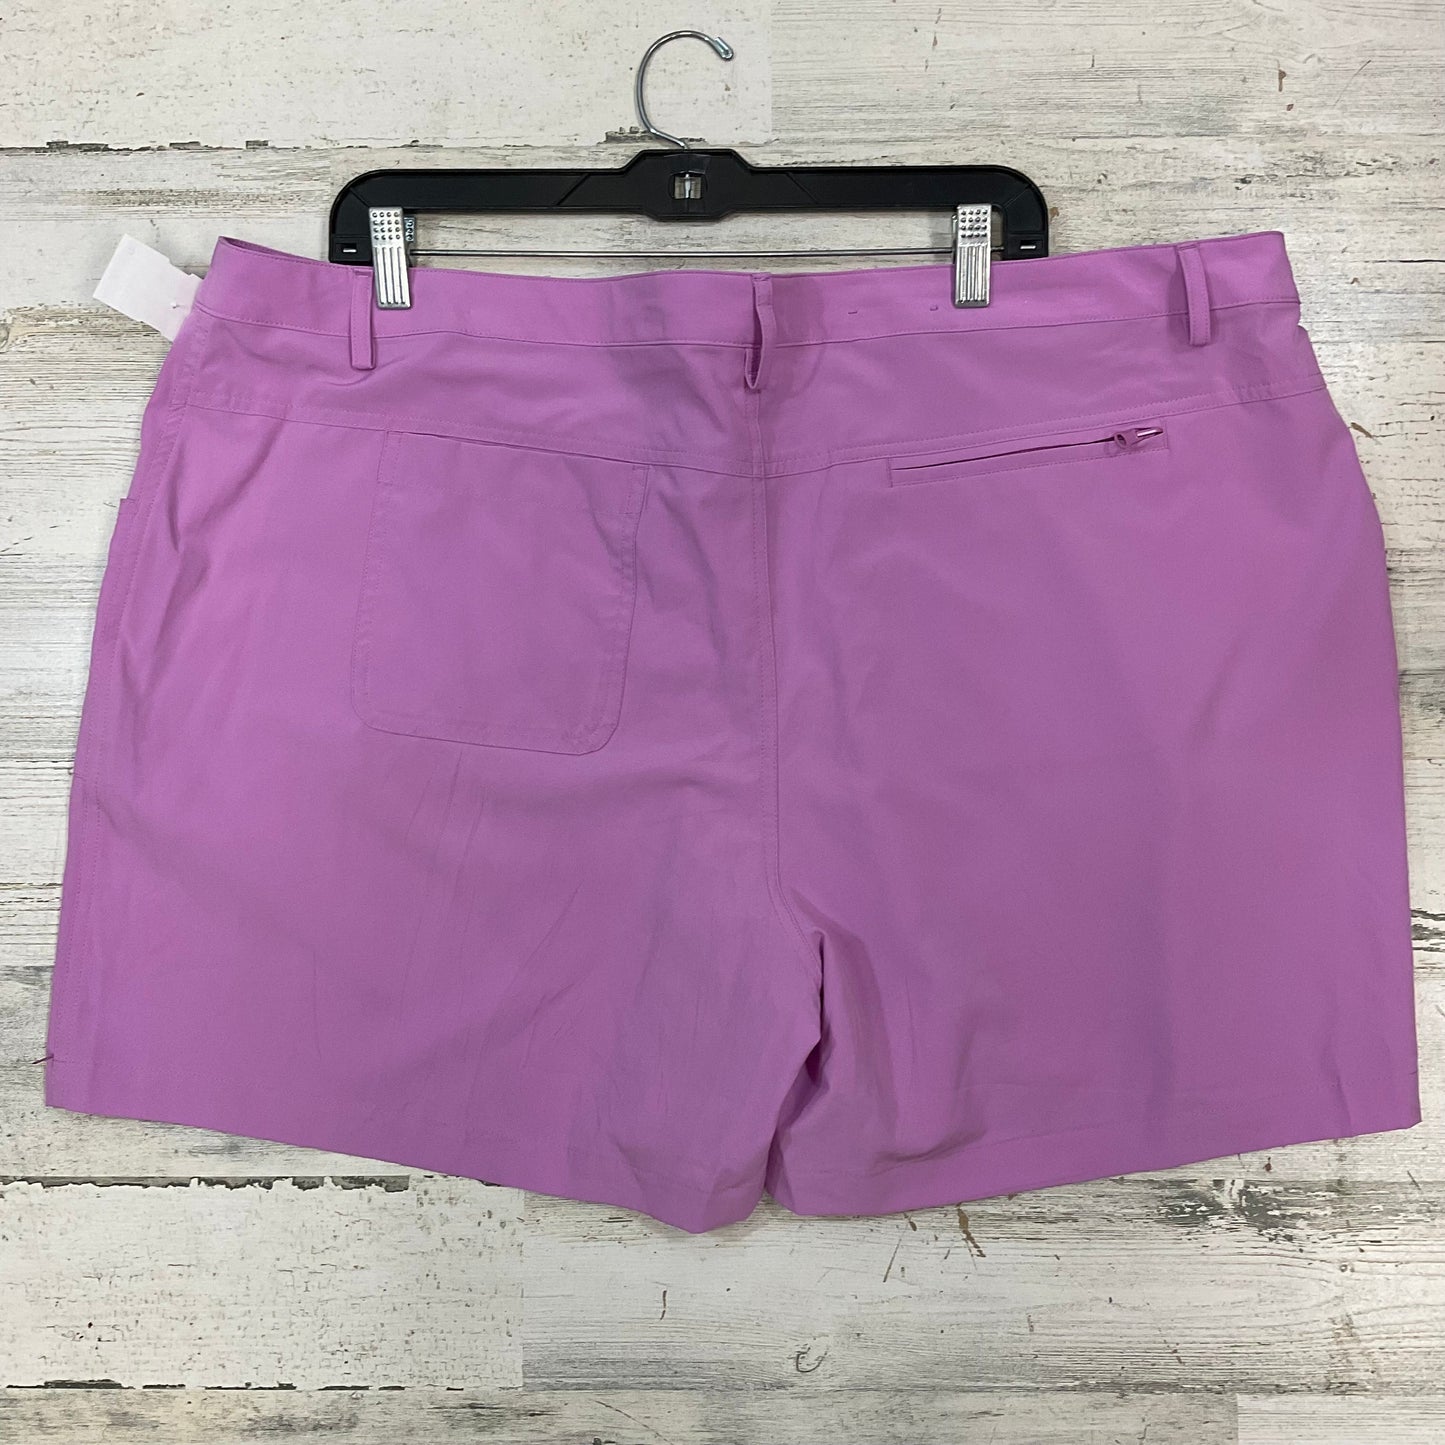 Shorts By Reel Legends  Size: 2x